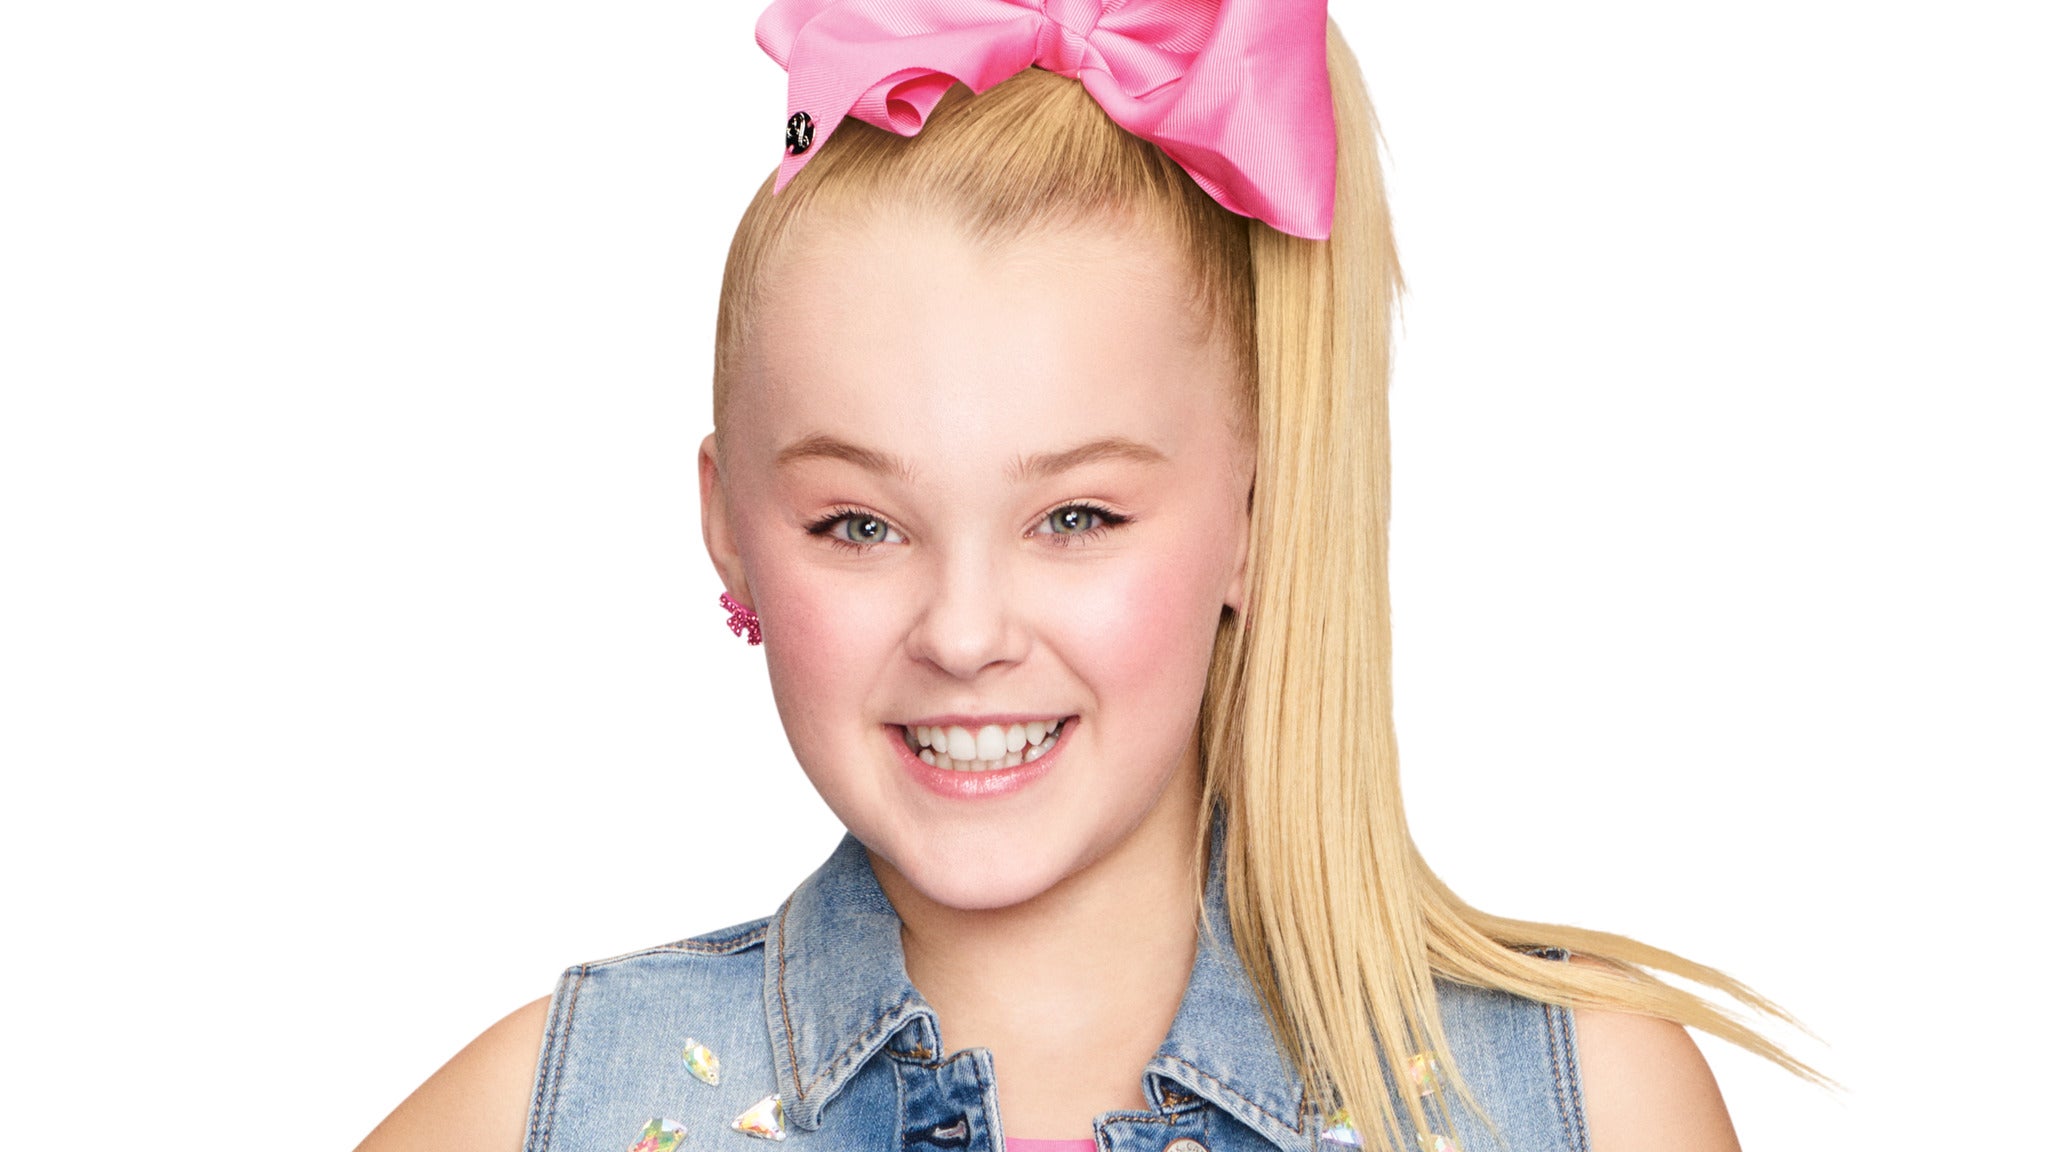 Nickelodeon's JoJo Siwa D.R.E.A.M. The Tour in Cedar Rapids promo photo for Official Platinum presale offer code